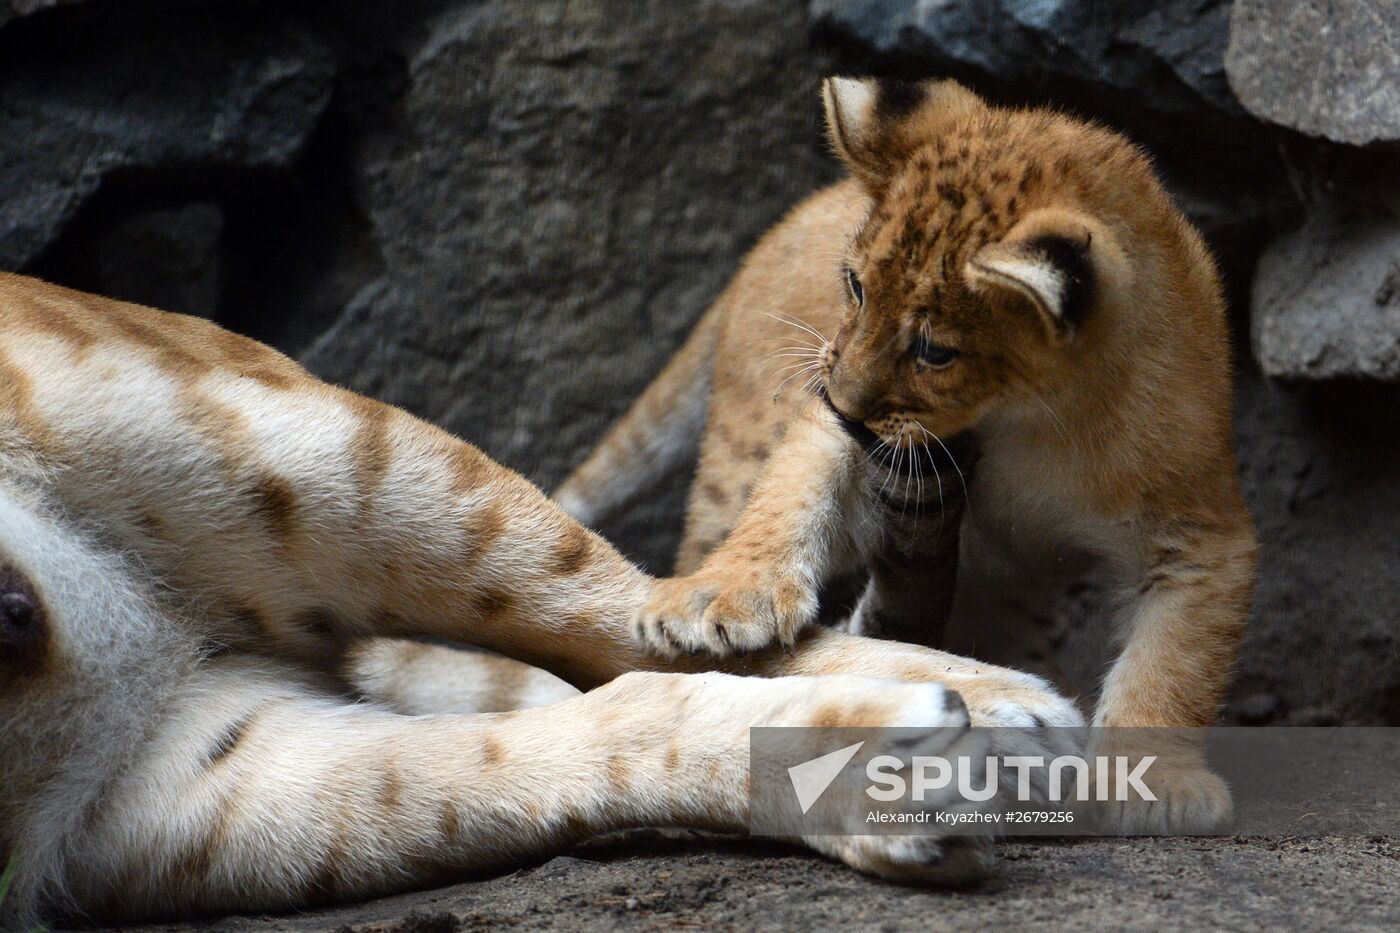 Ligress gives birth to new cubs in Novosibirsk Zoo